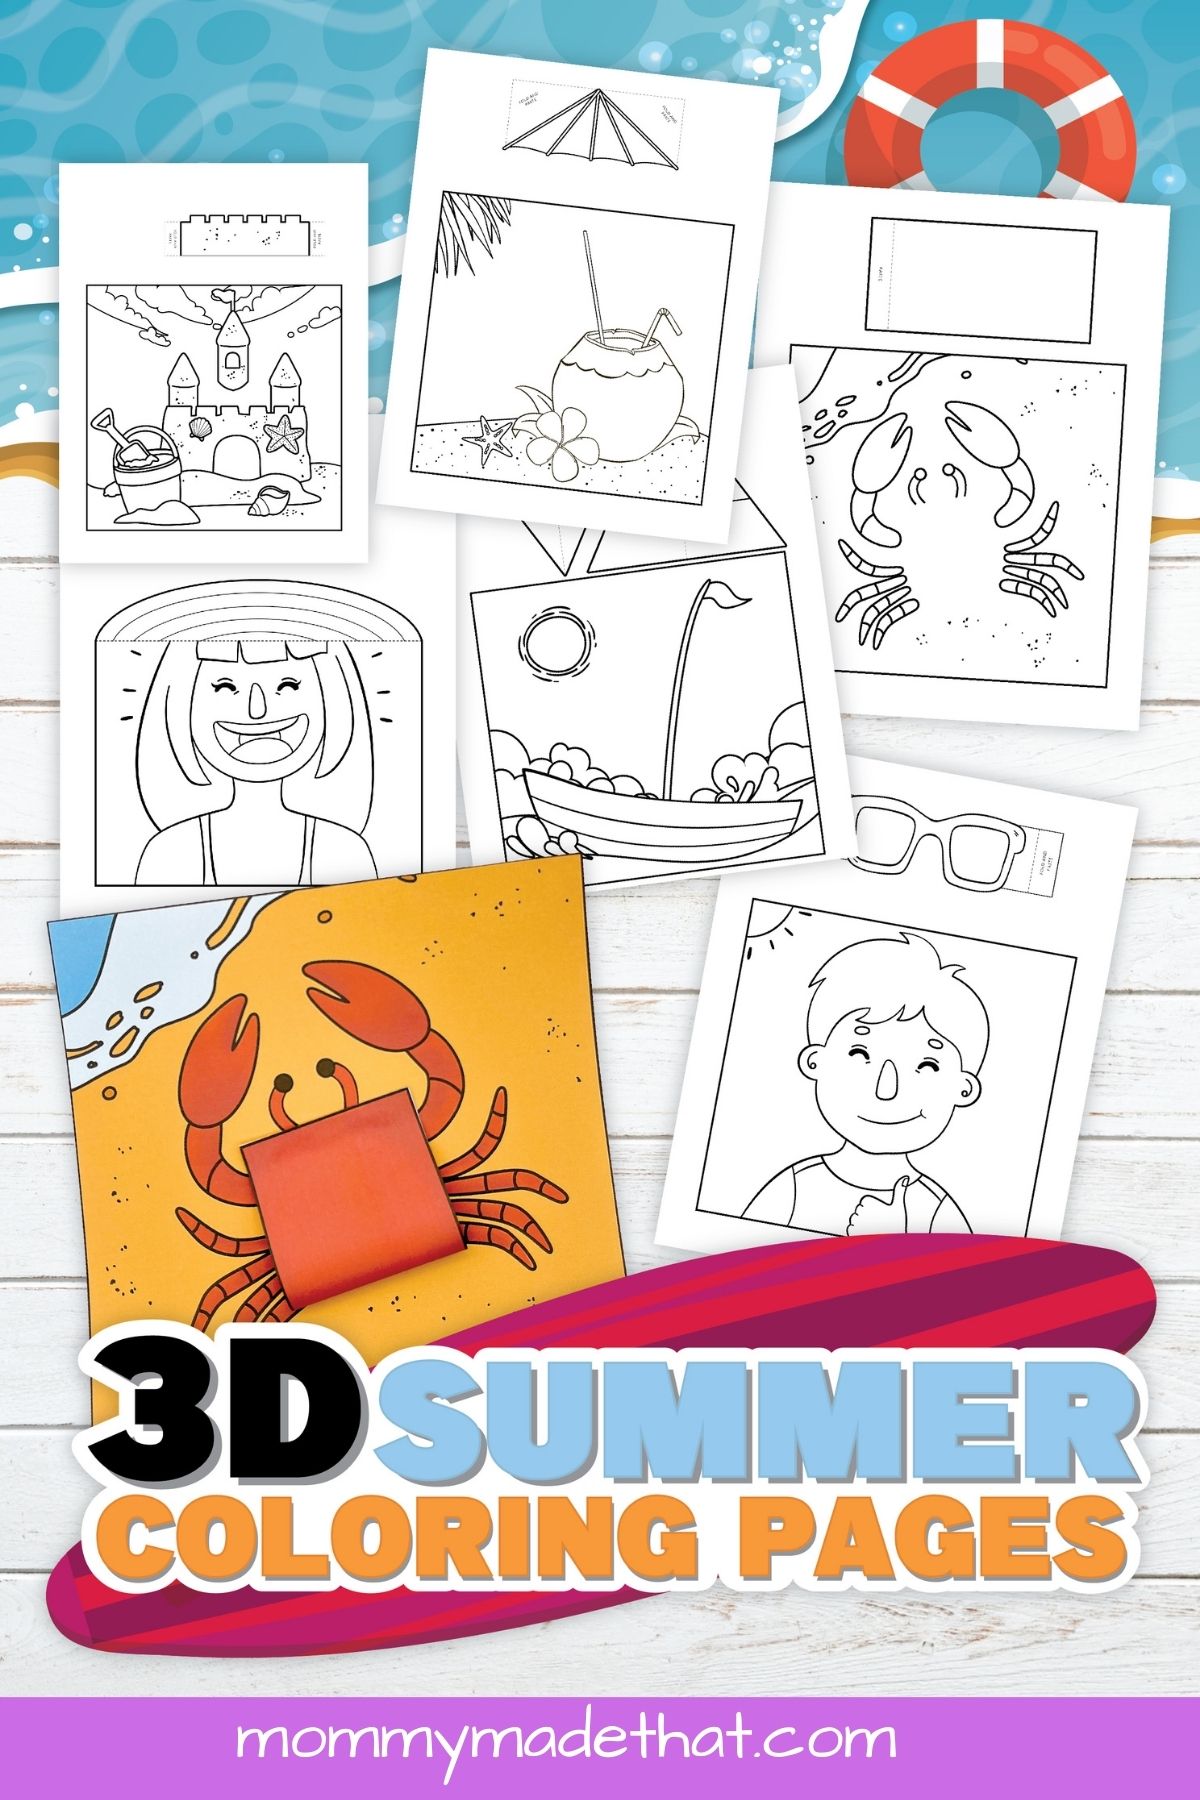 3D summer coloring pages for kids